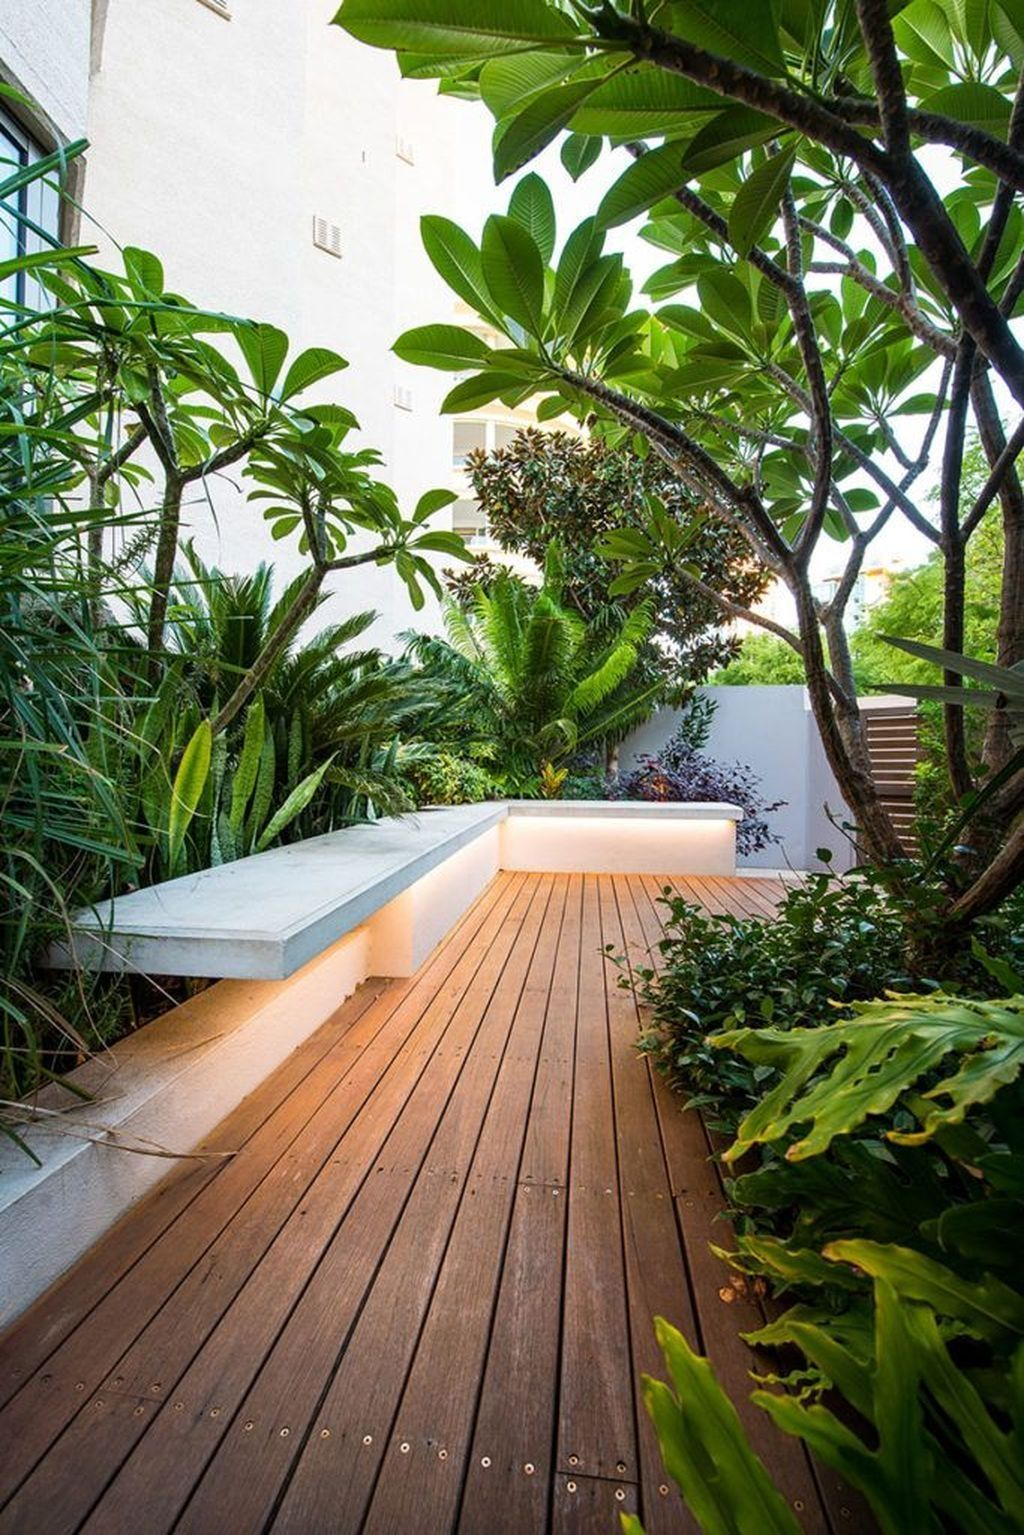 Outstanding Garden Design Ideas With Best Style To Try08